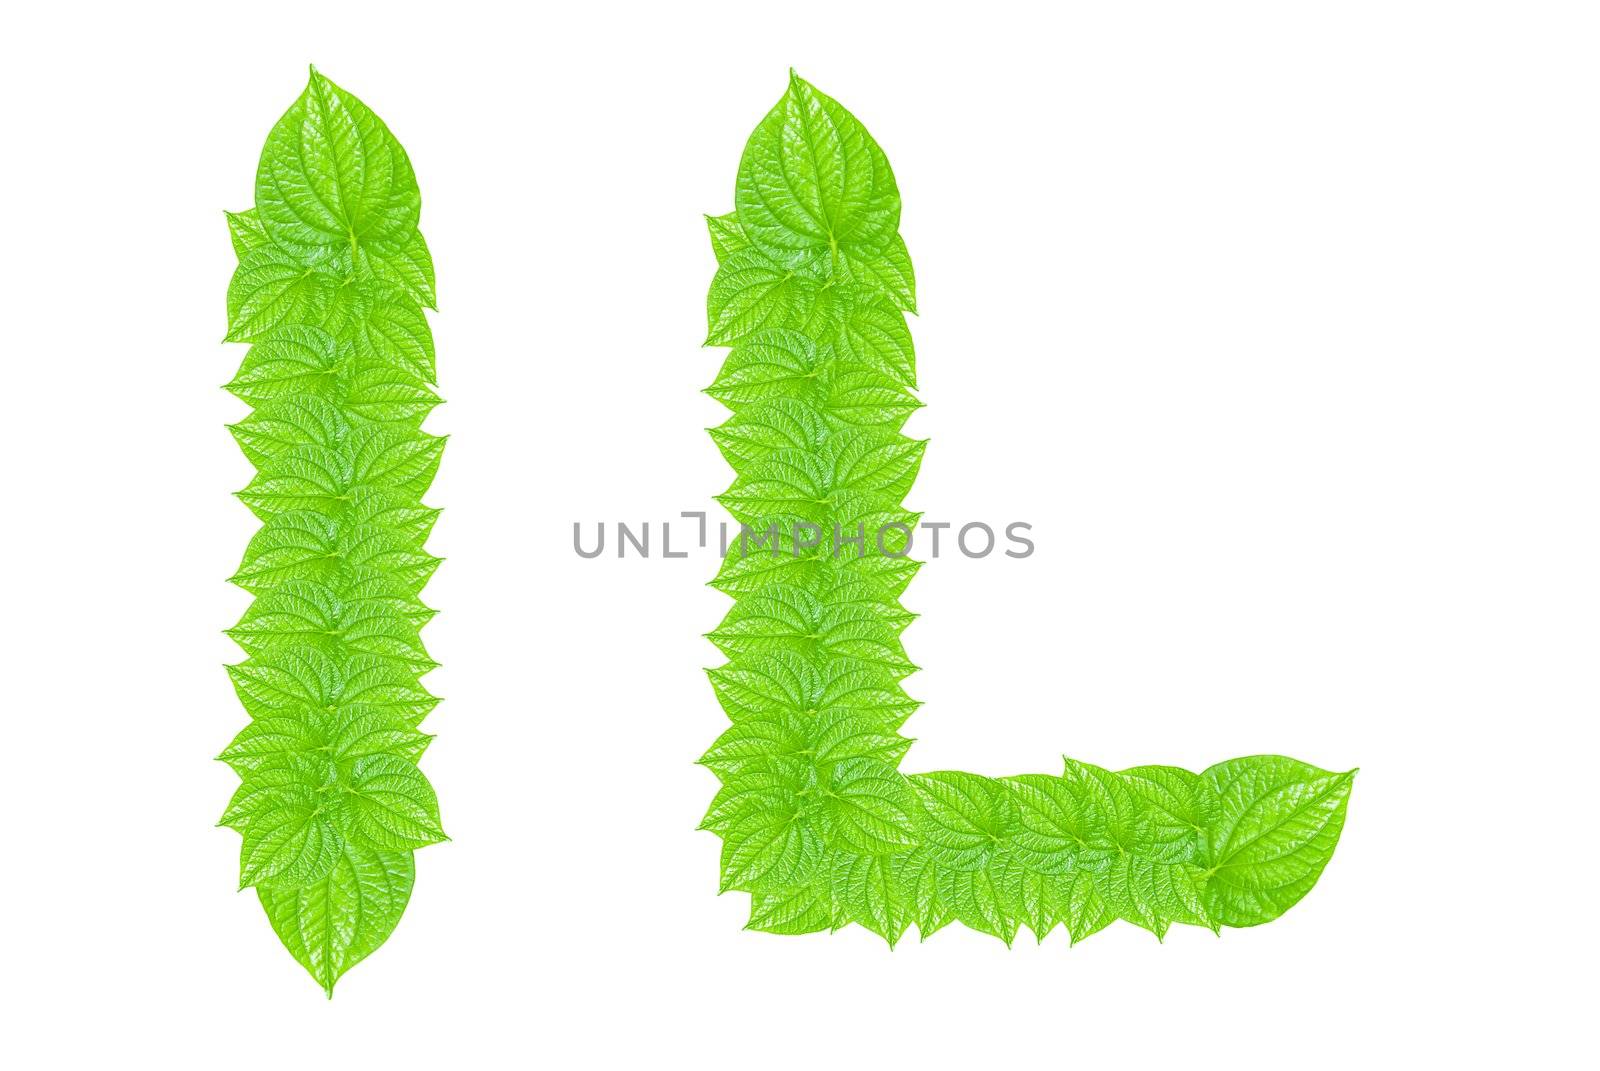 English alphabet made from green leafs with letter L in small capital and large capital letter